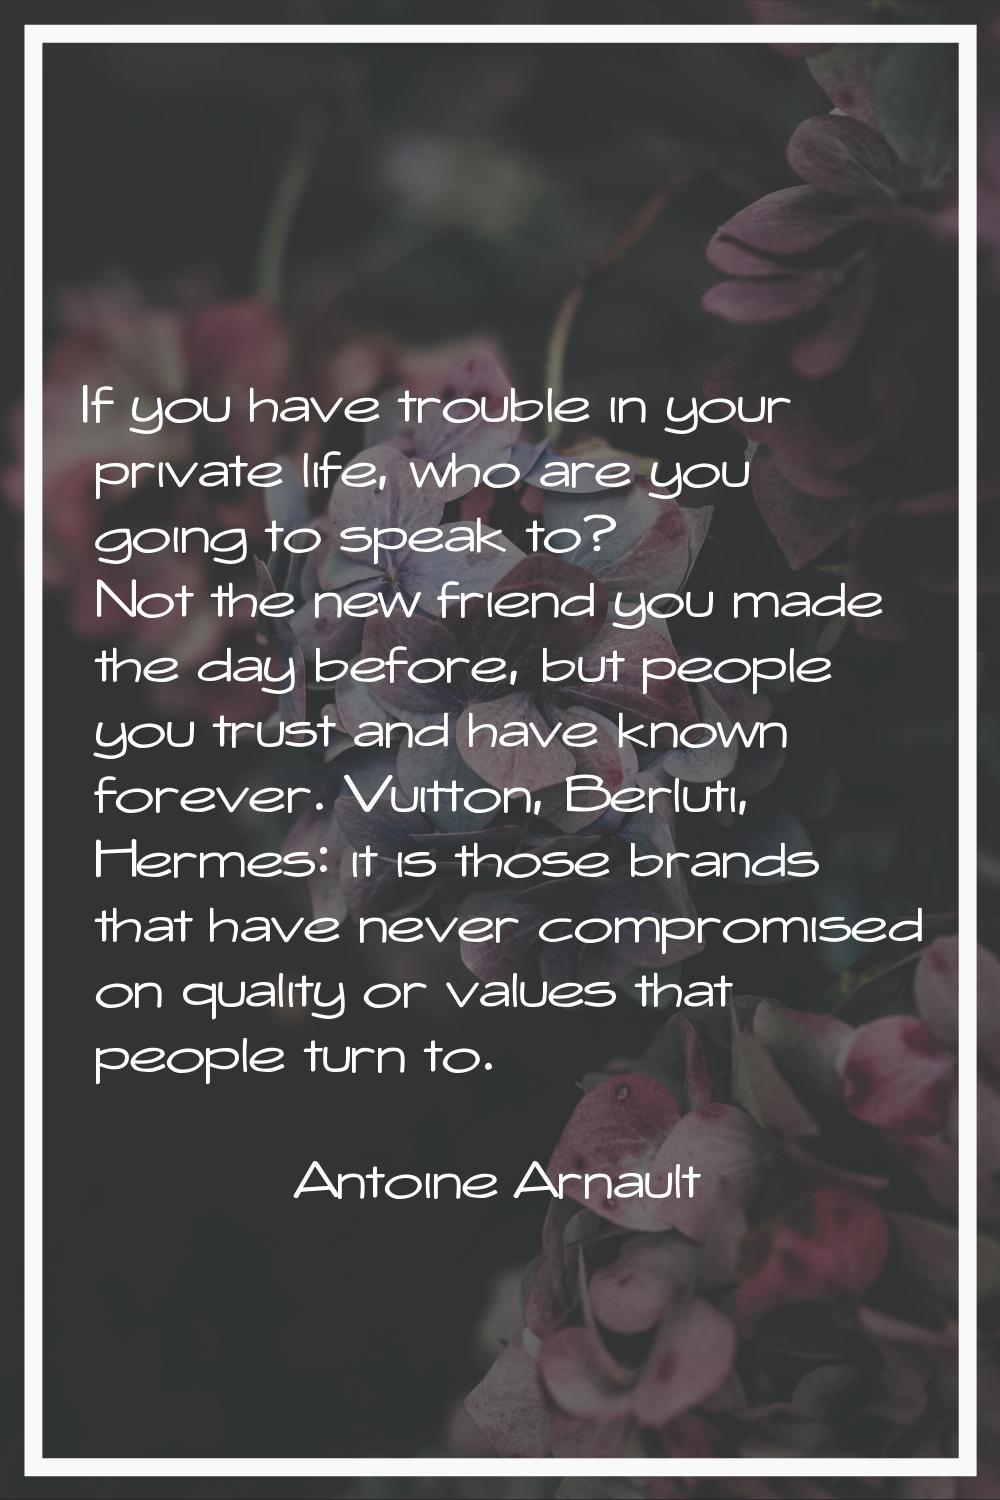 If you have trouble in your private life, who are you going to speak to? Not the new friend you mad